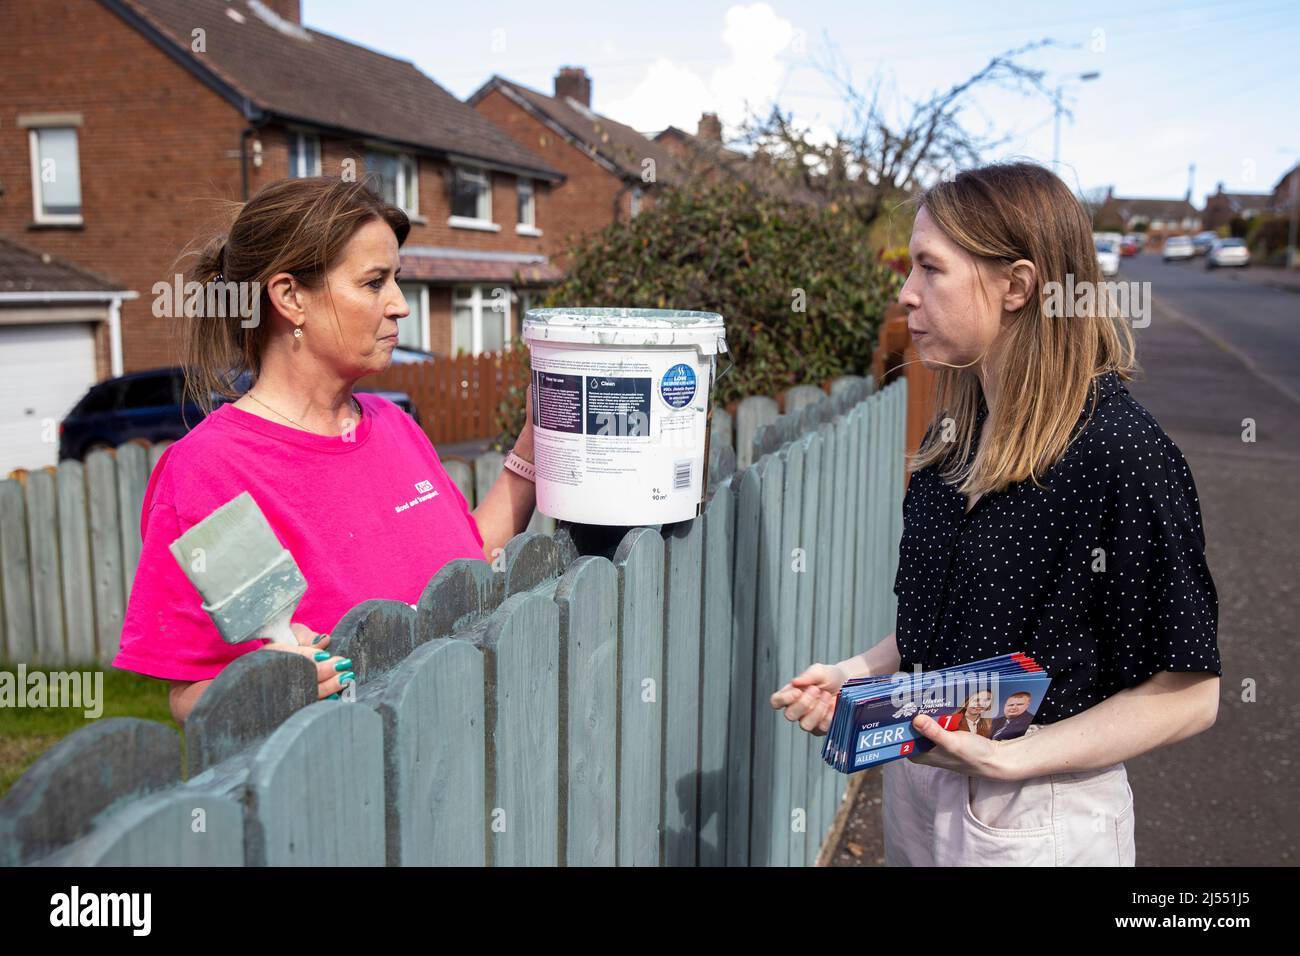 Lauren Kerr (right), UUP Belfast East candidate in upcoming the 2022 Northern Ireland Assembly election speaking with Jenny Elwood while canvassing in east Belfast. Stock Photo